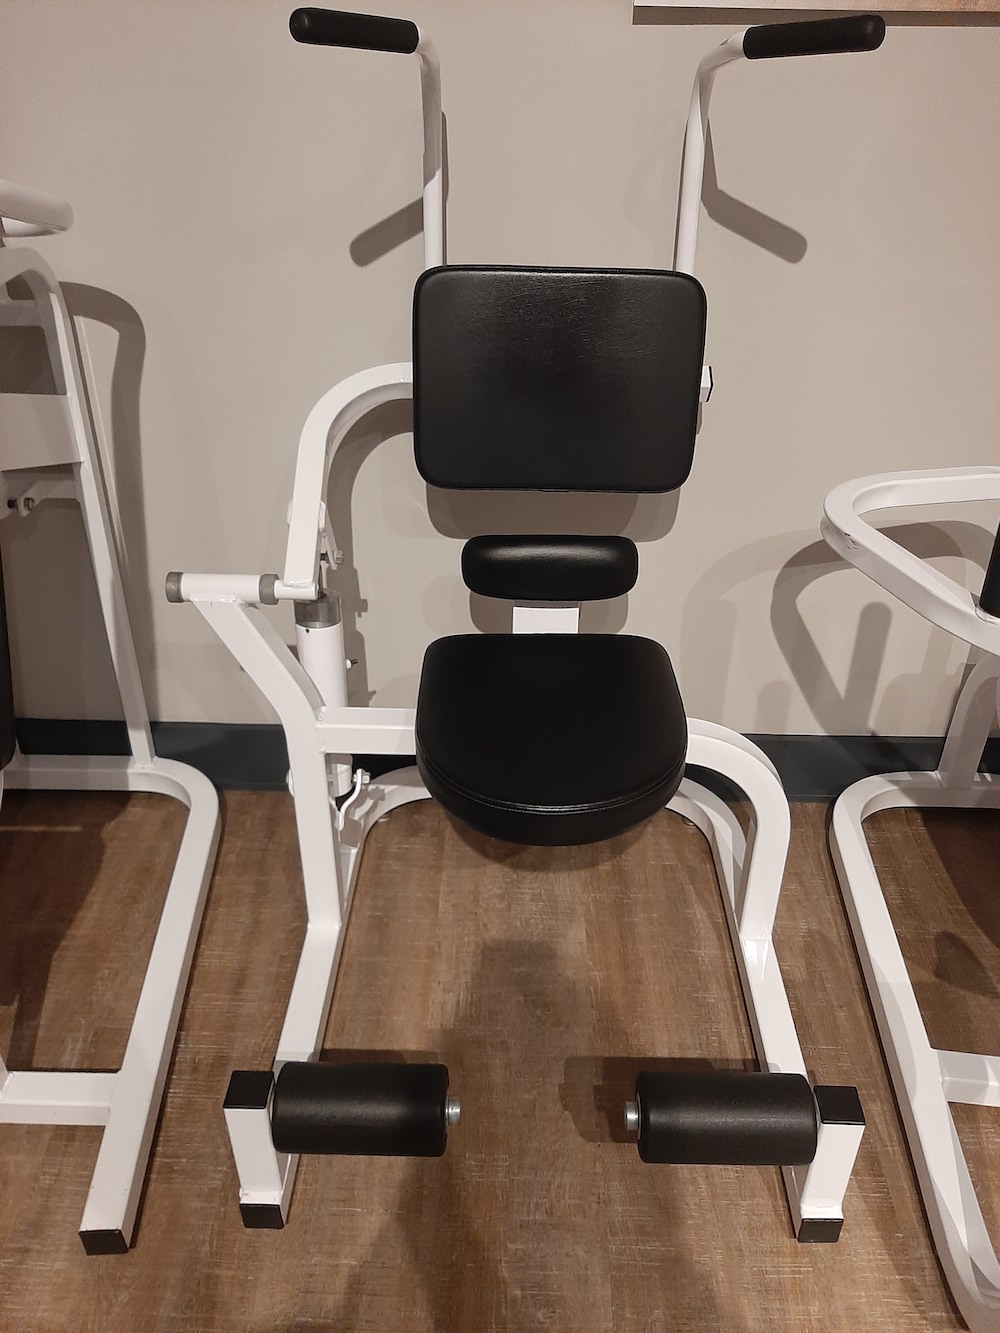 PACE HYDRAULIC EXERCISE EQUIPMENT